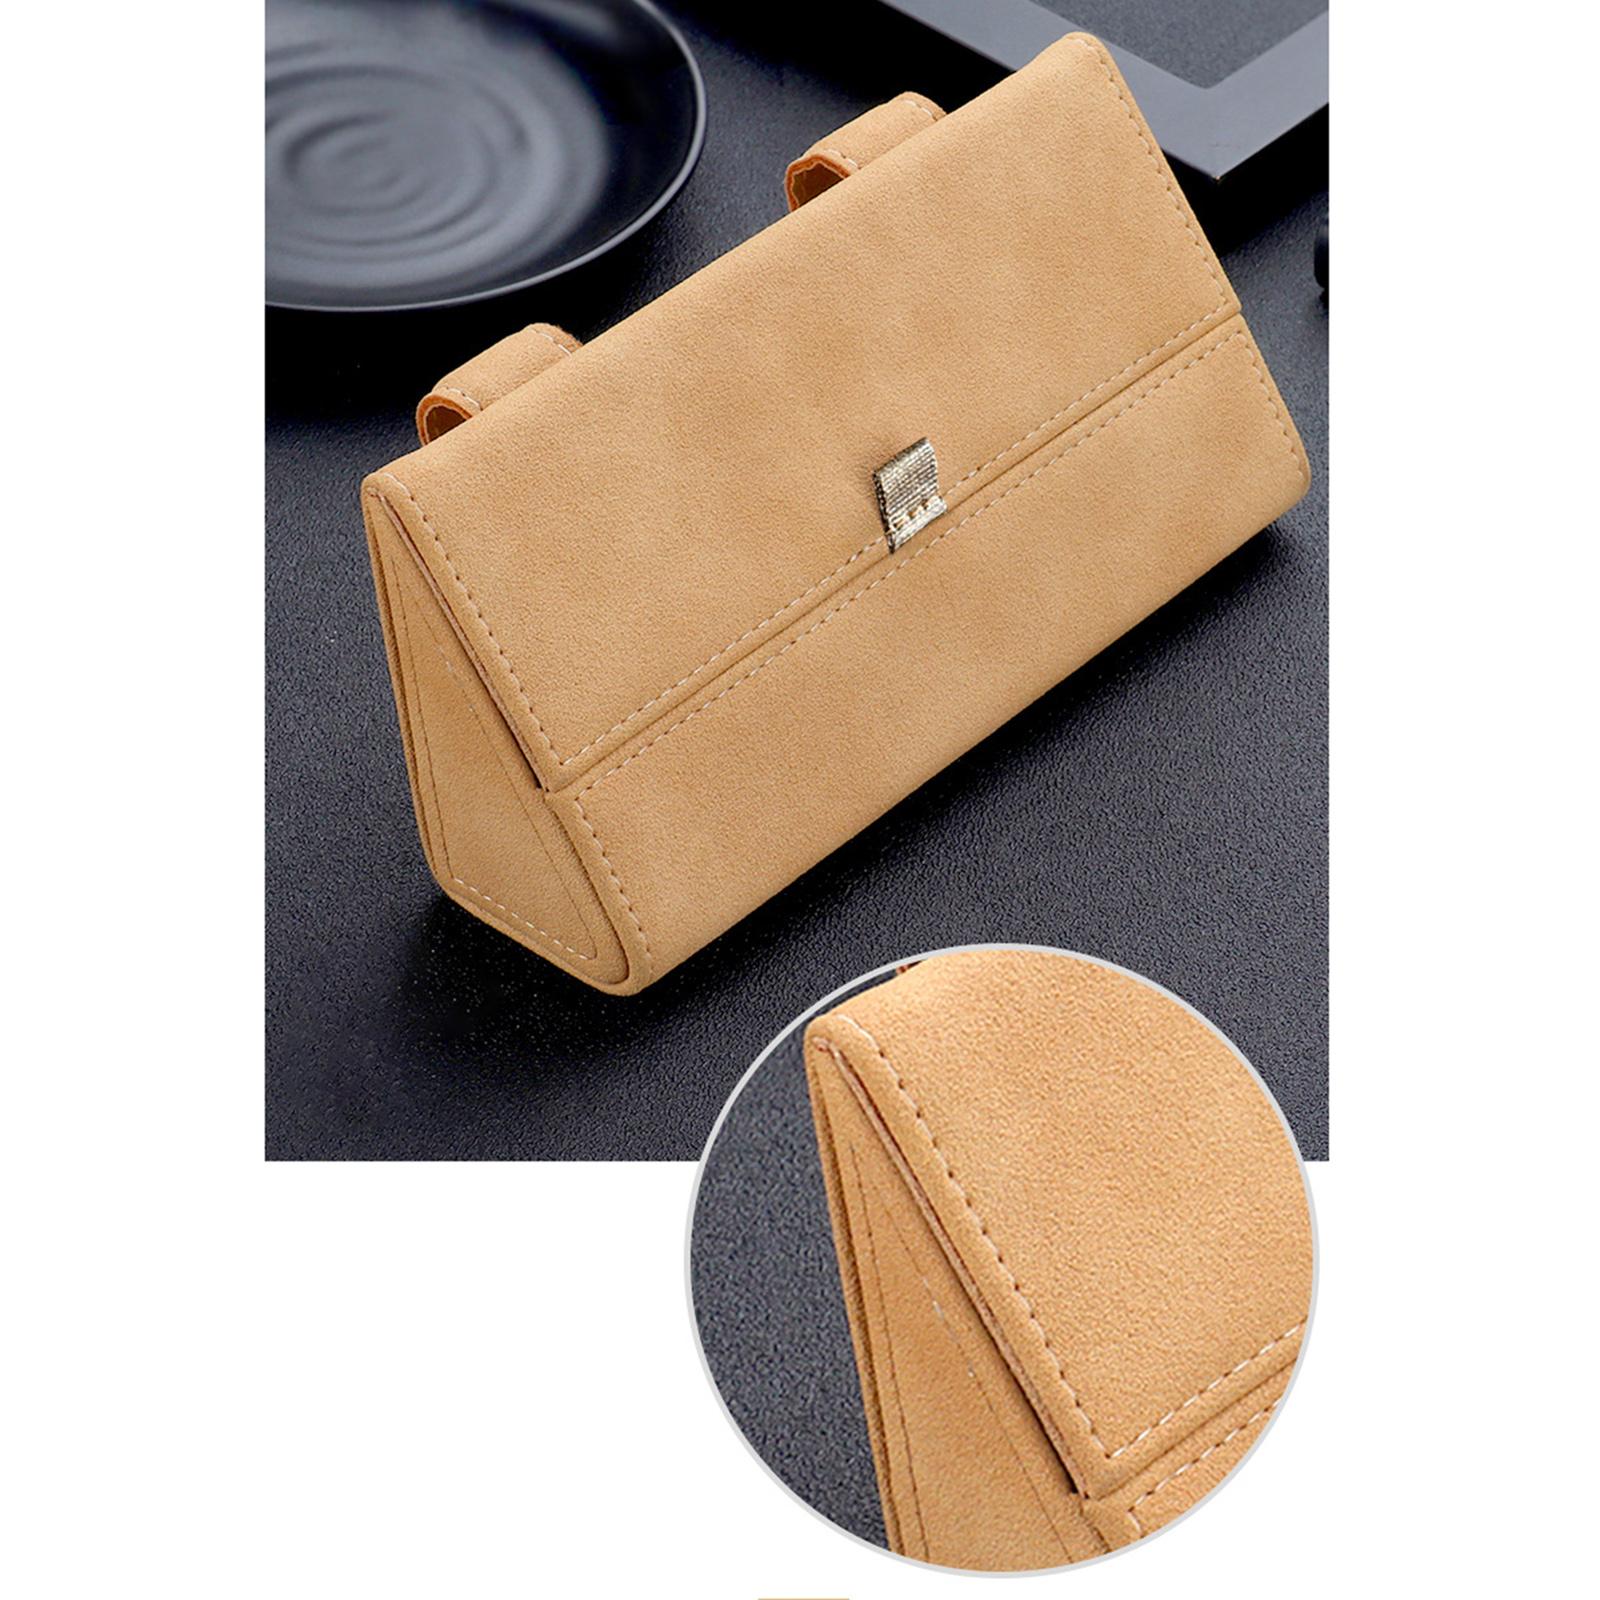 Car Glasses Case Universal Holder with Magnetic Closure Storage Box Beige